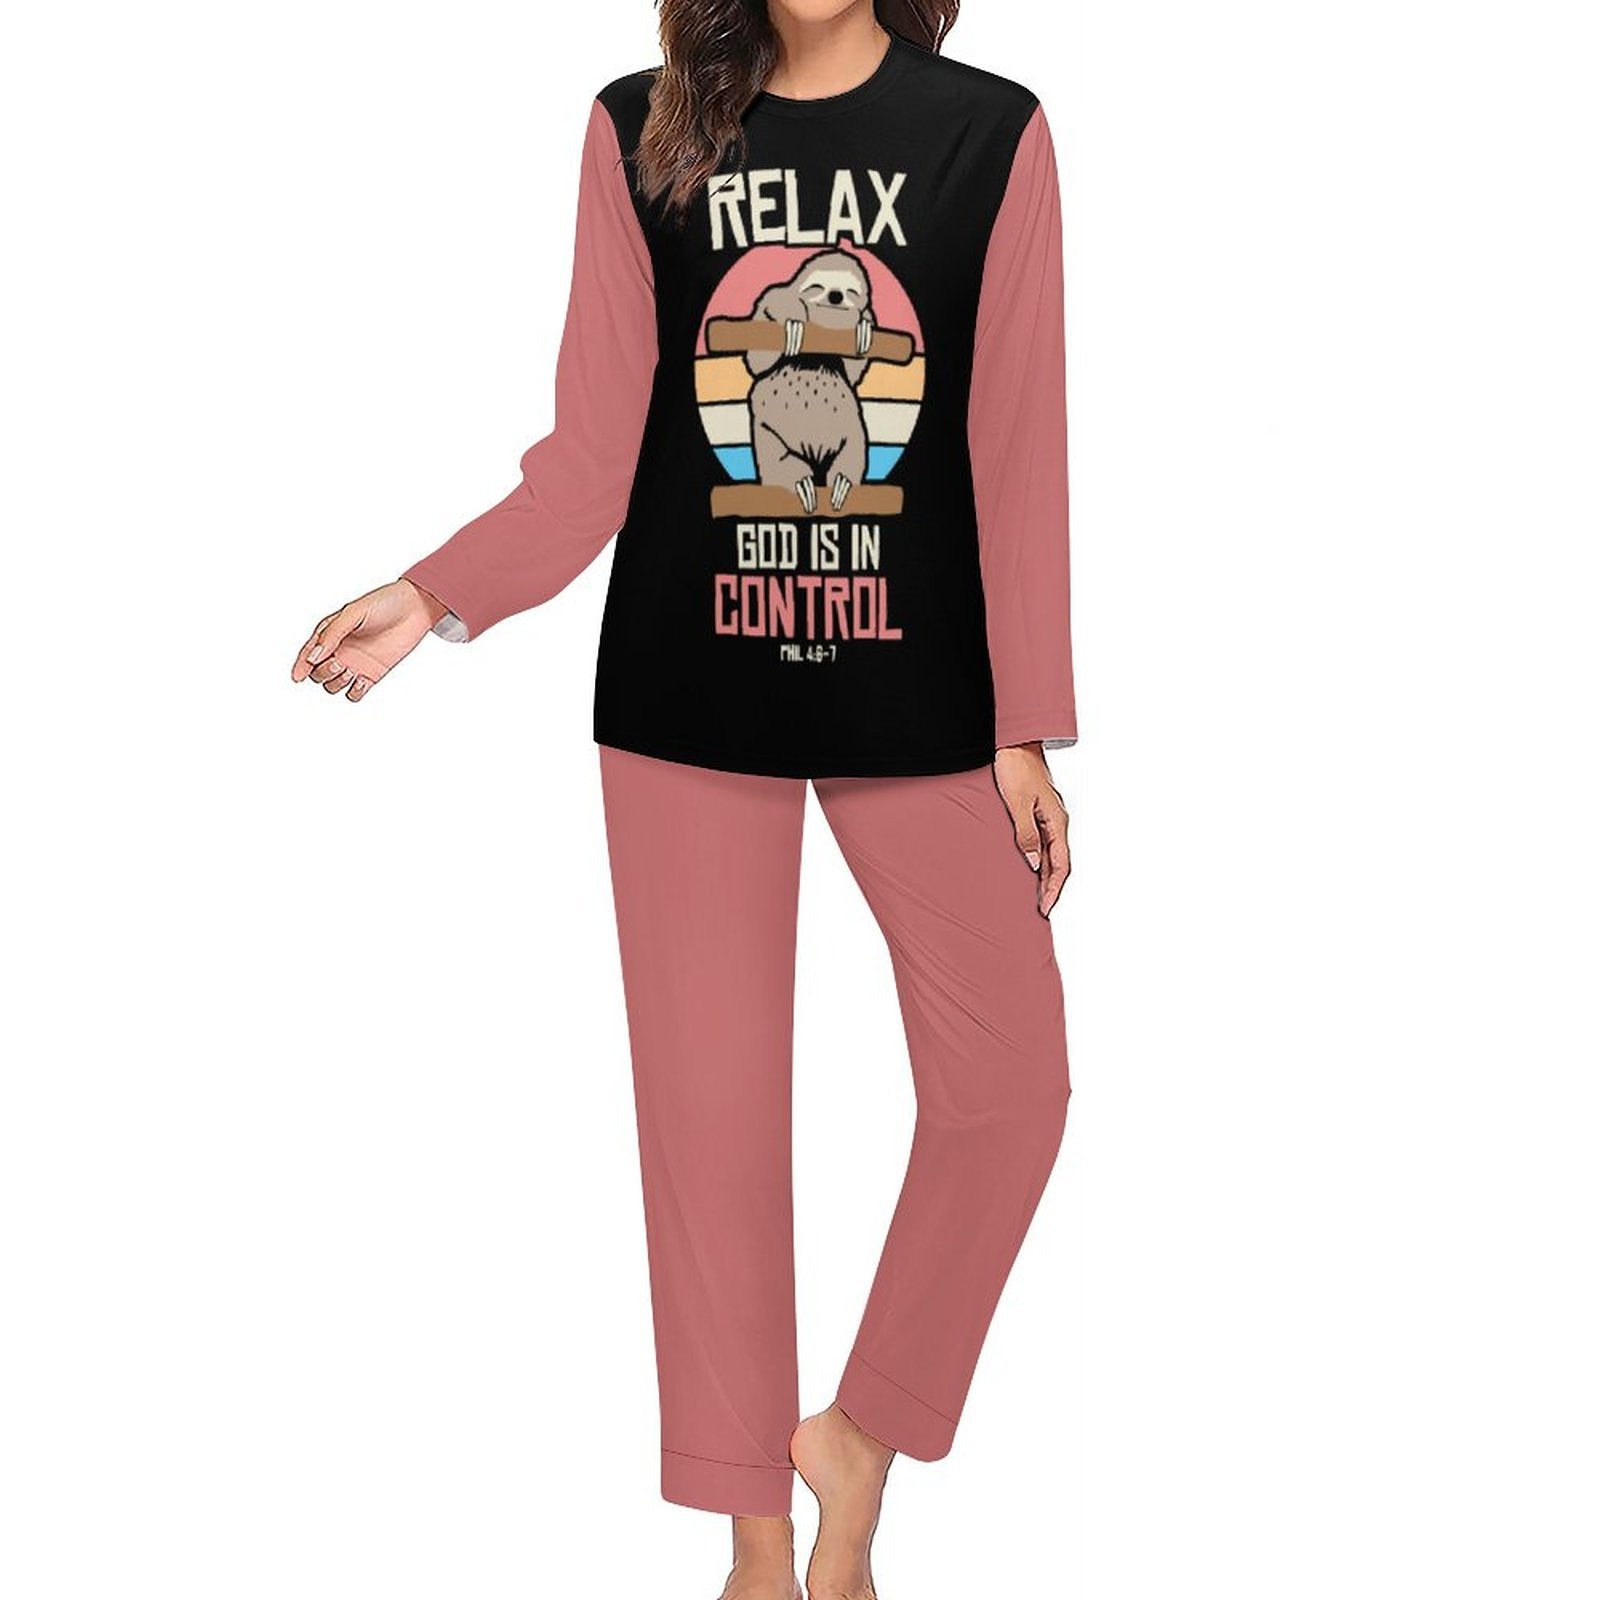 Relax God Is In Control Women's Christian Pajama Set SALE-Personal Design